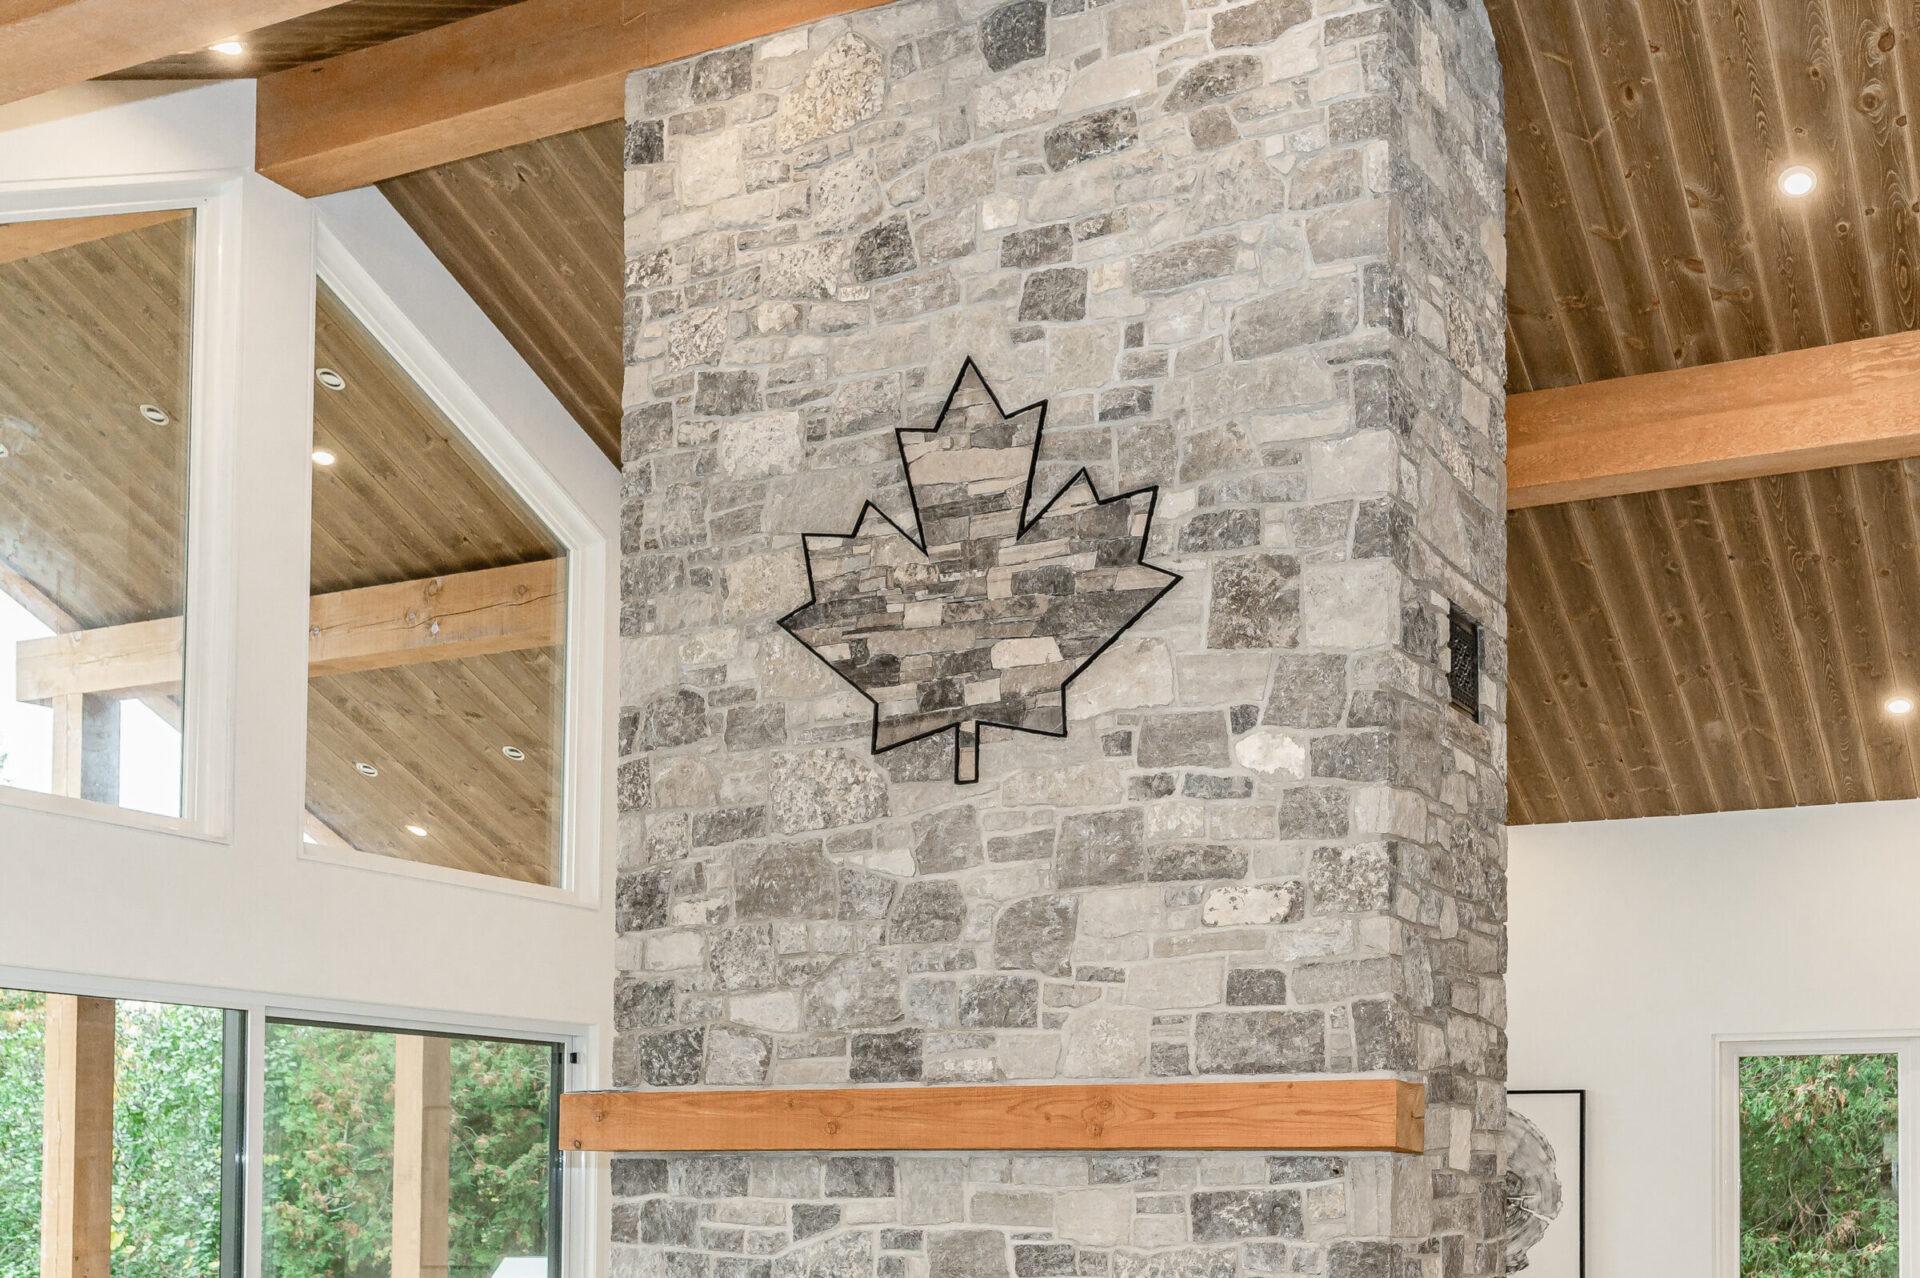 A spacious room with high ceilings, large windows, wooden beams, and a stone pillar featuring a stylized maple leaf design in the center.